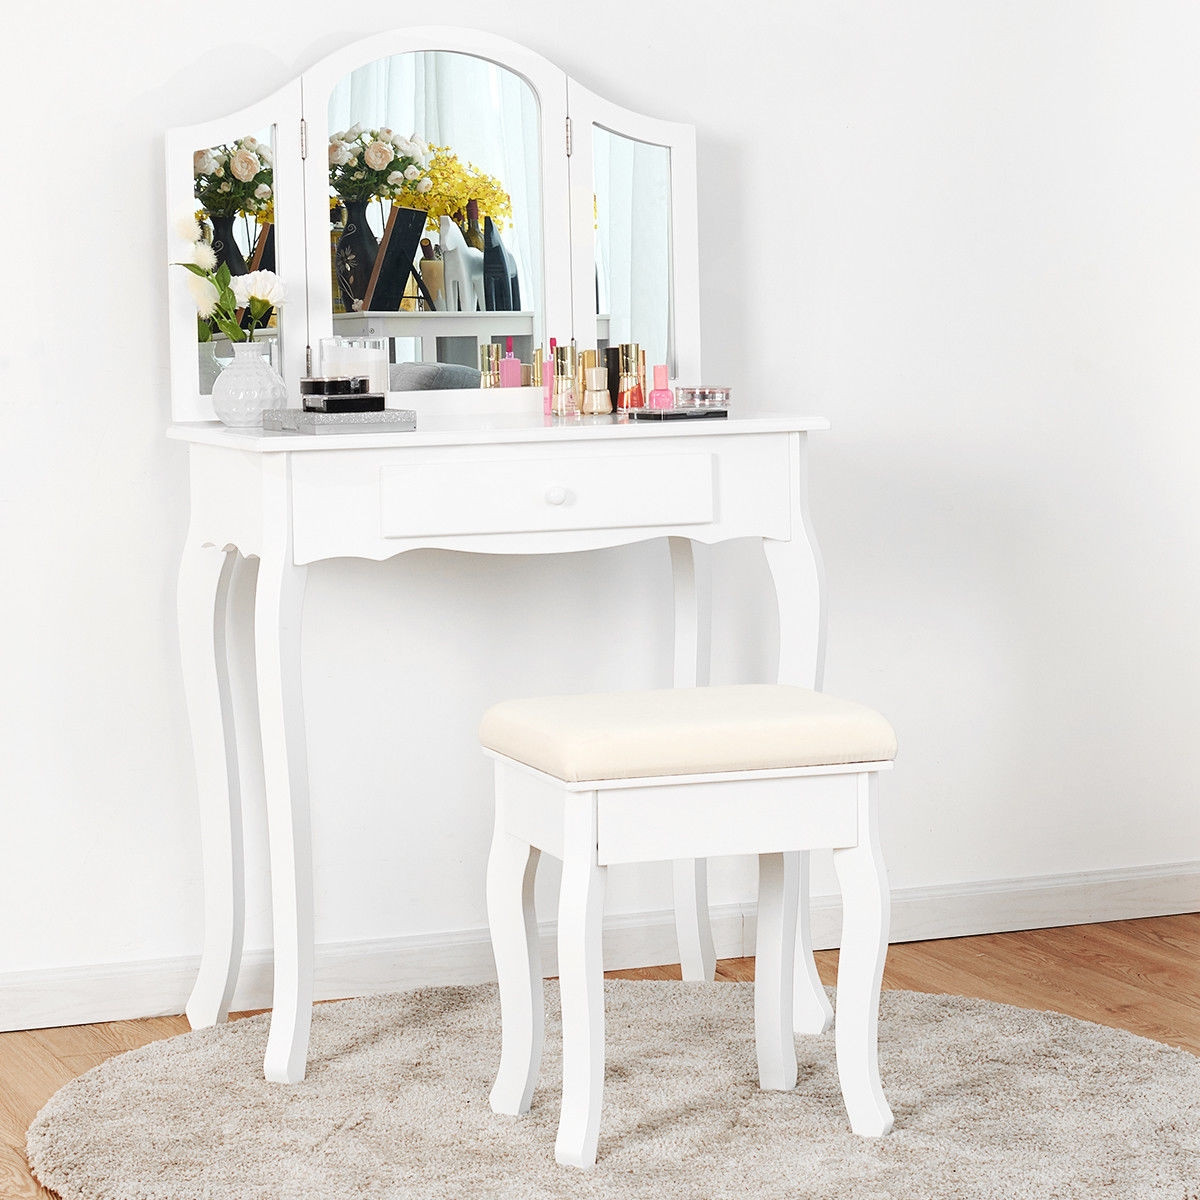 Vanity Makeup Dressing Table With Tri-Folding Mirror And Drawer-Black / White